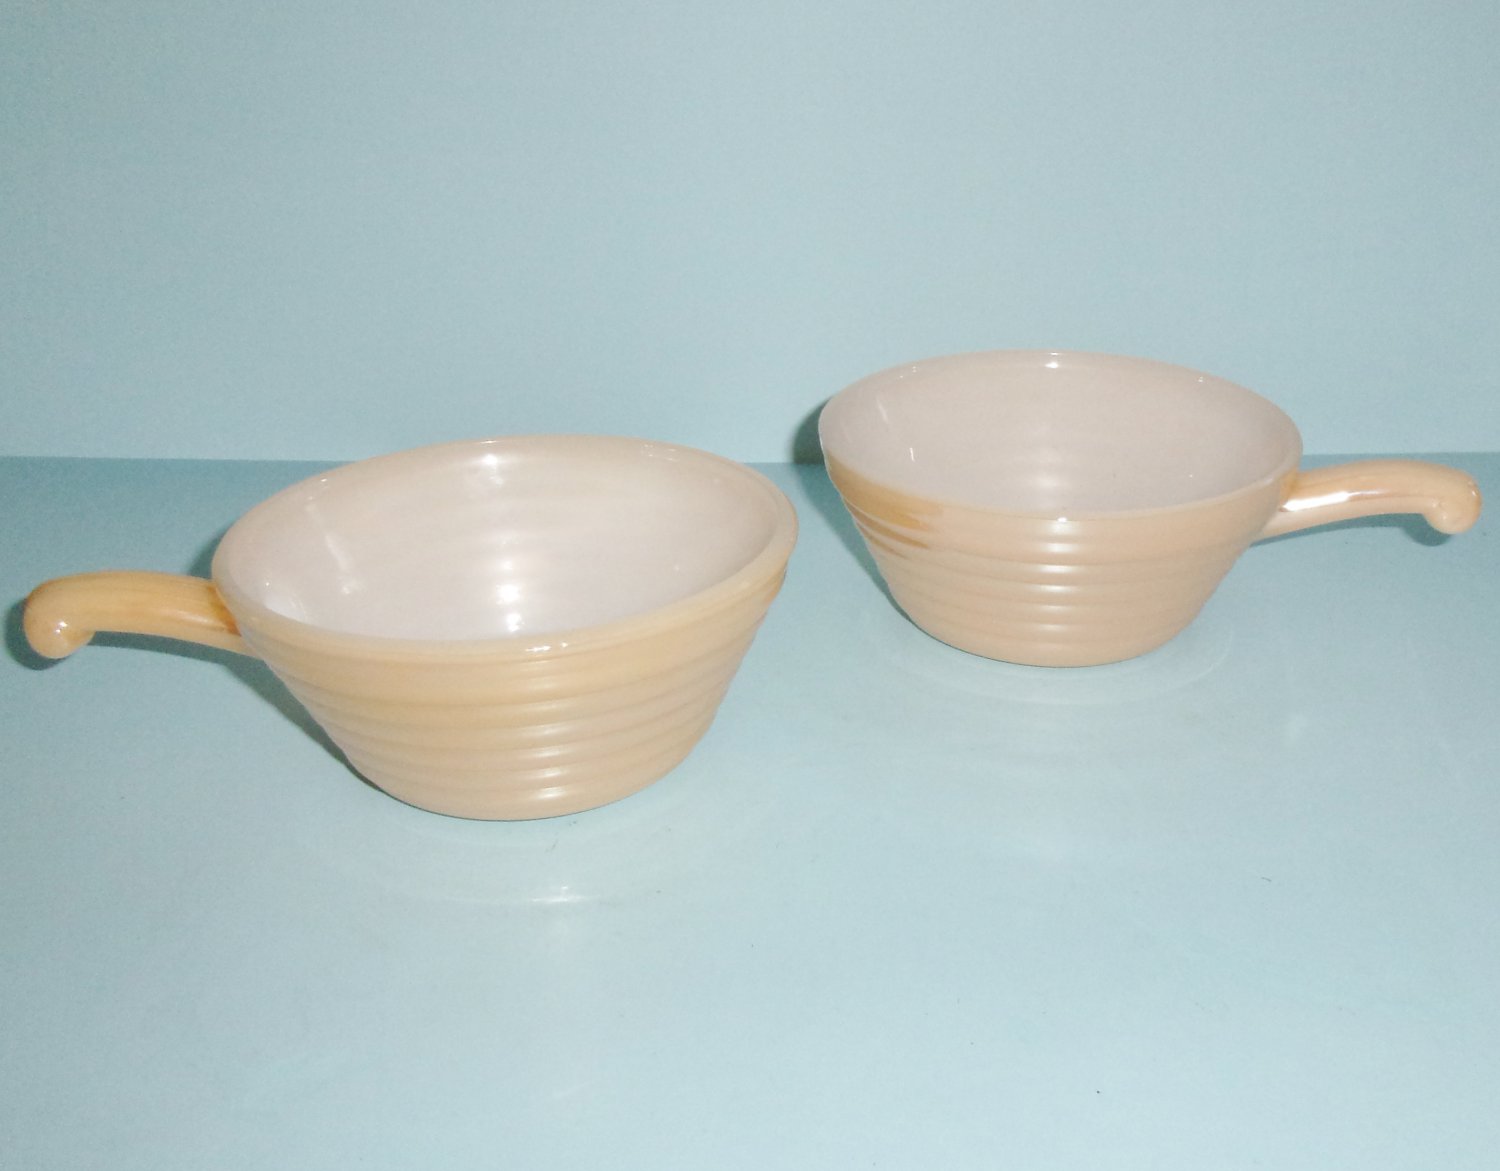 Fire King Copper Tint Pair Of Beehive Soup or Cereal Bowls With Handles